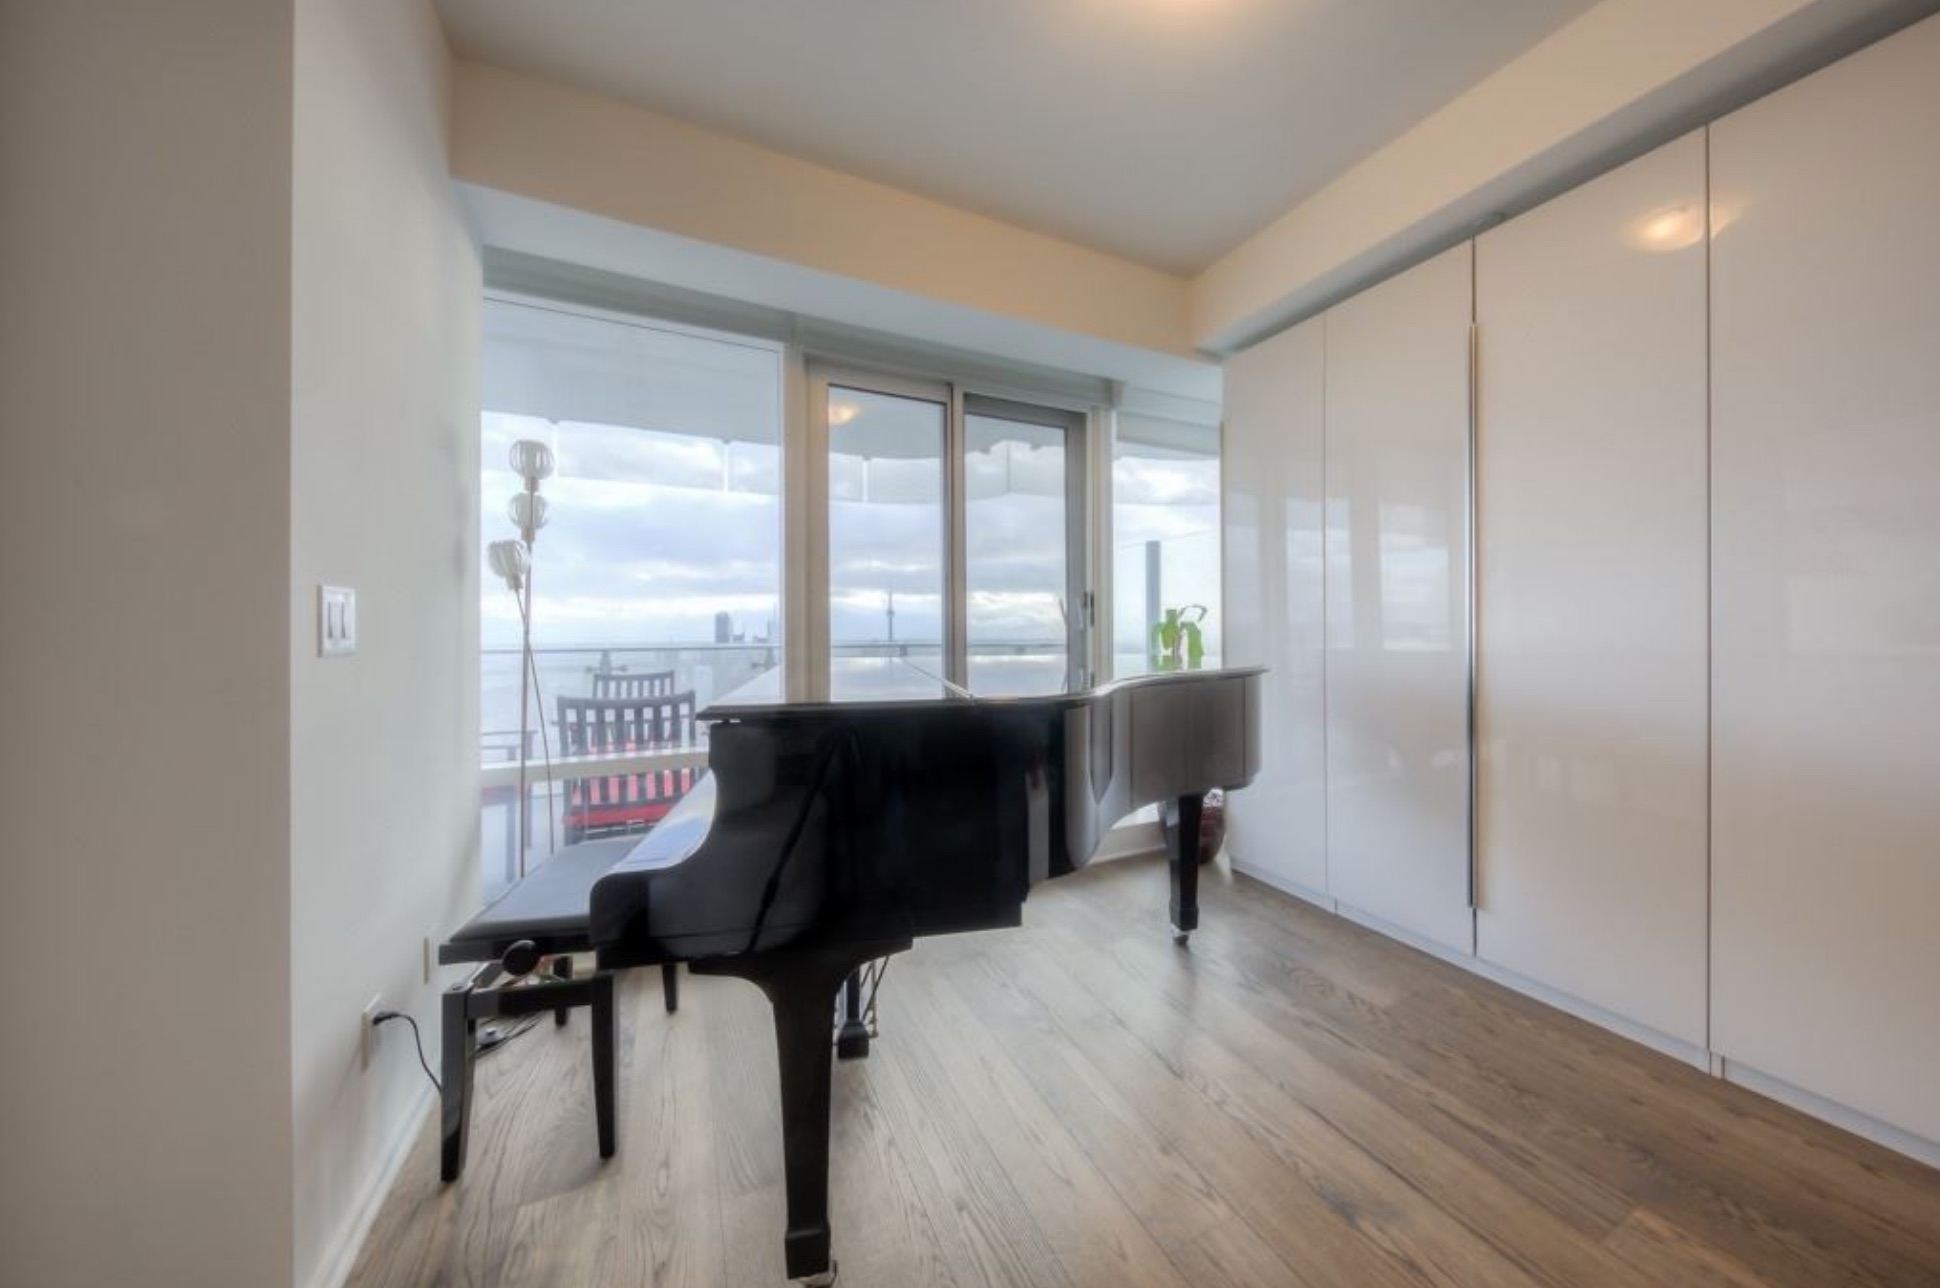 A baby grand piano situated in front of floor-to-ceiling windows in the living room space